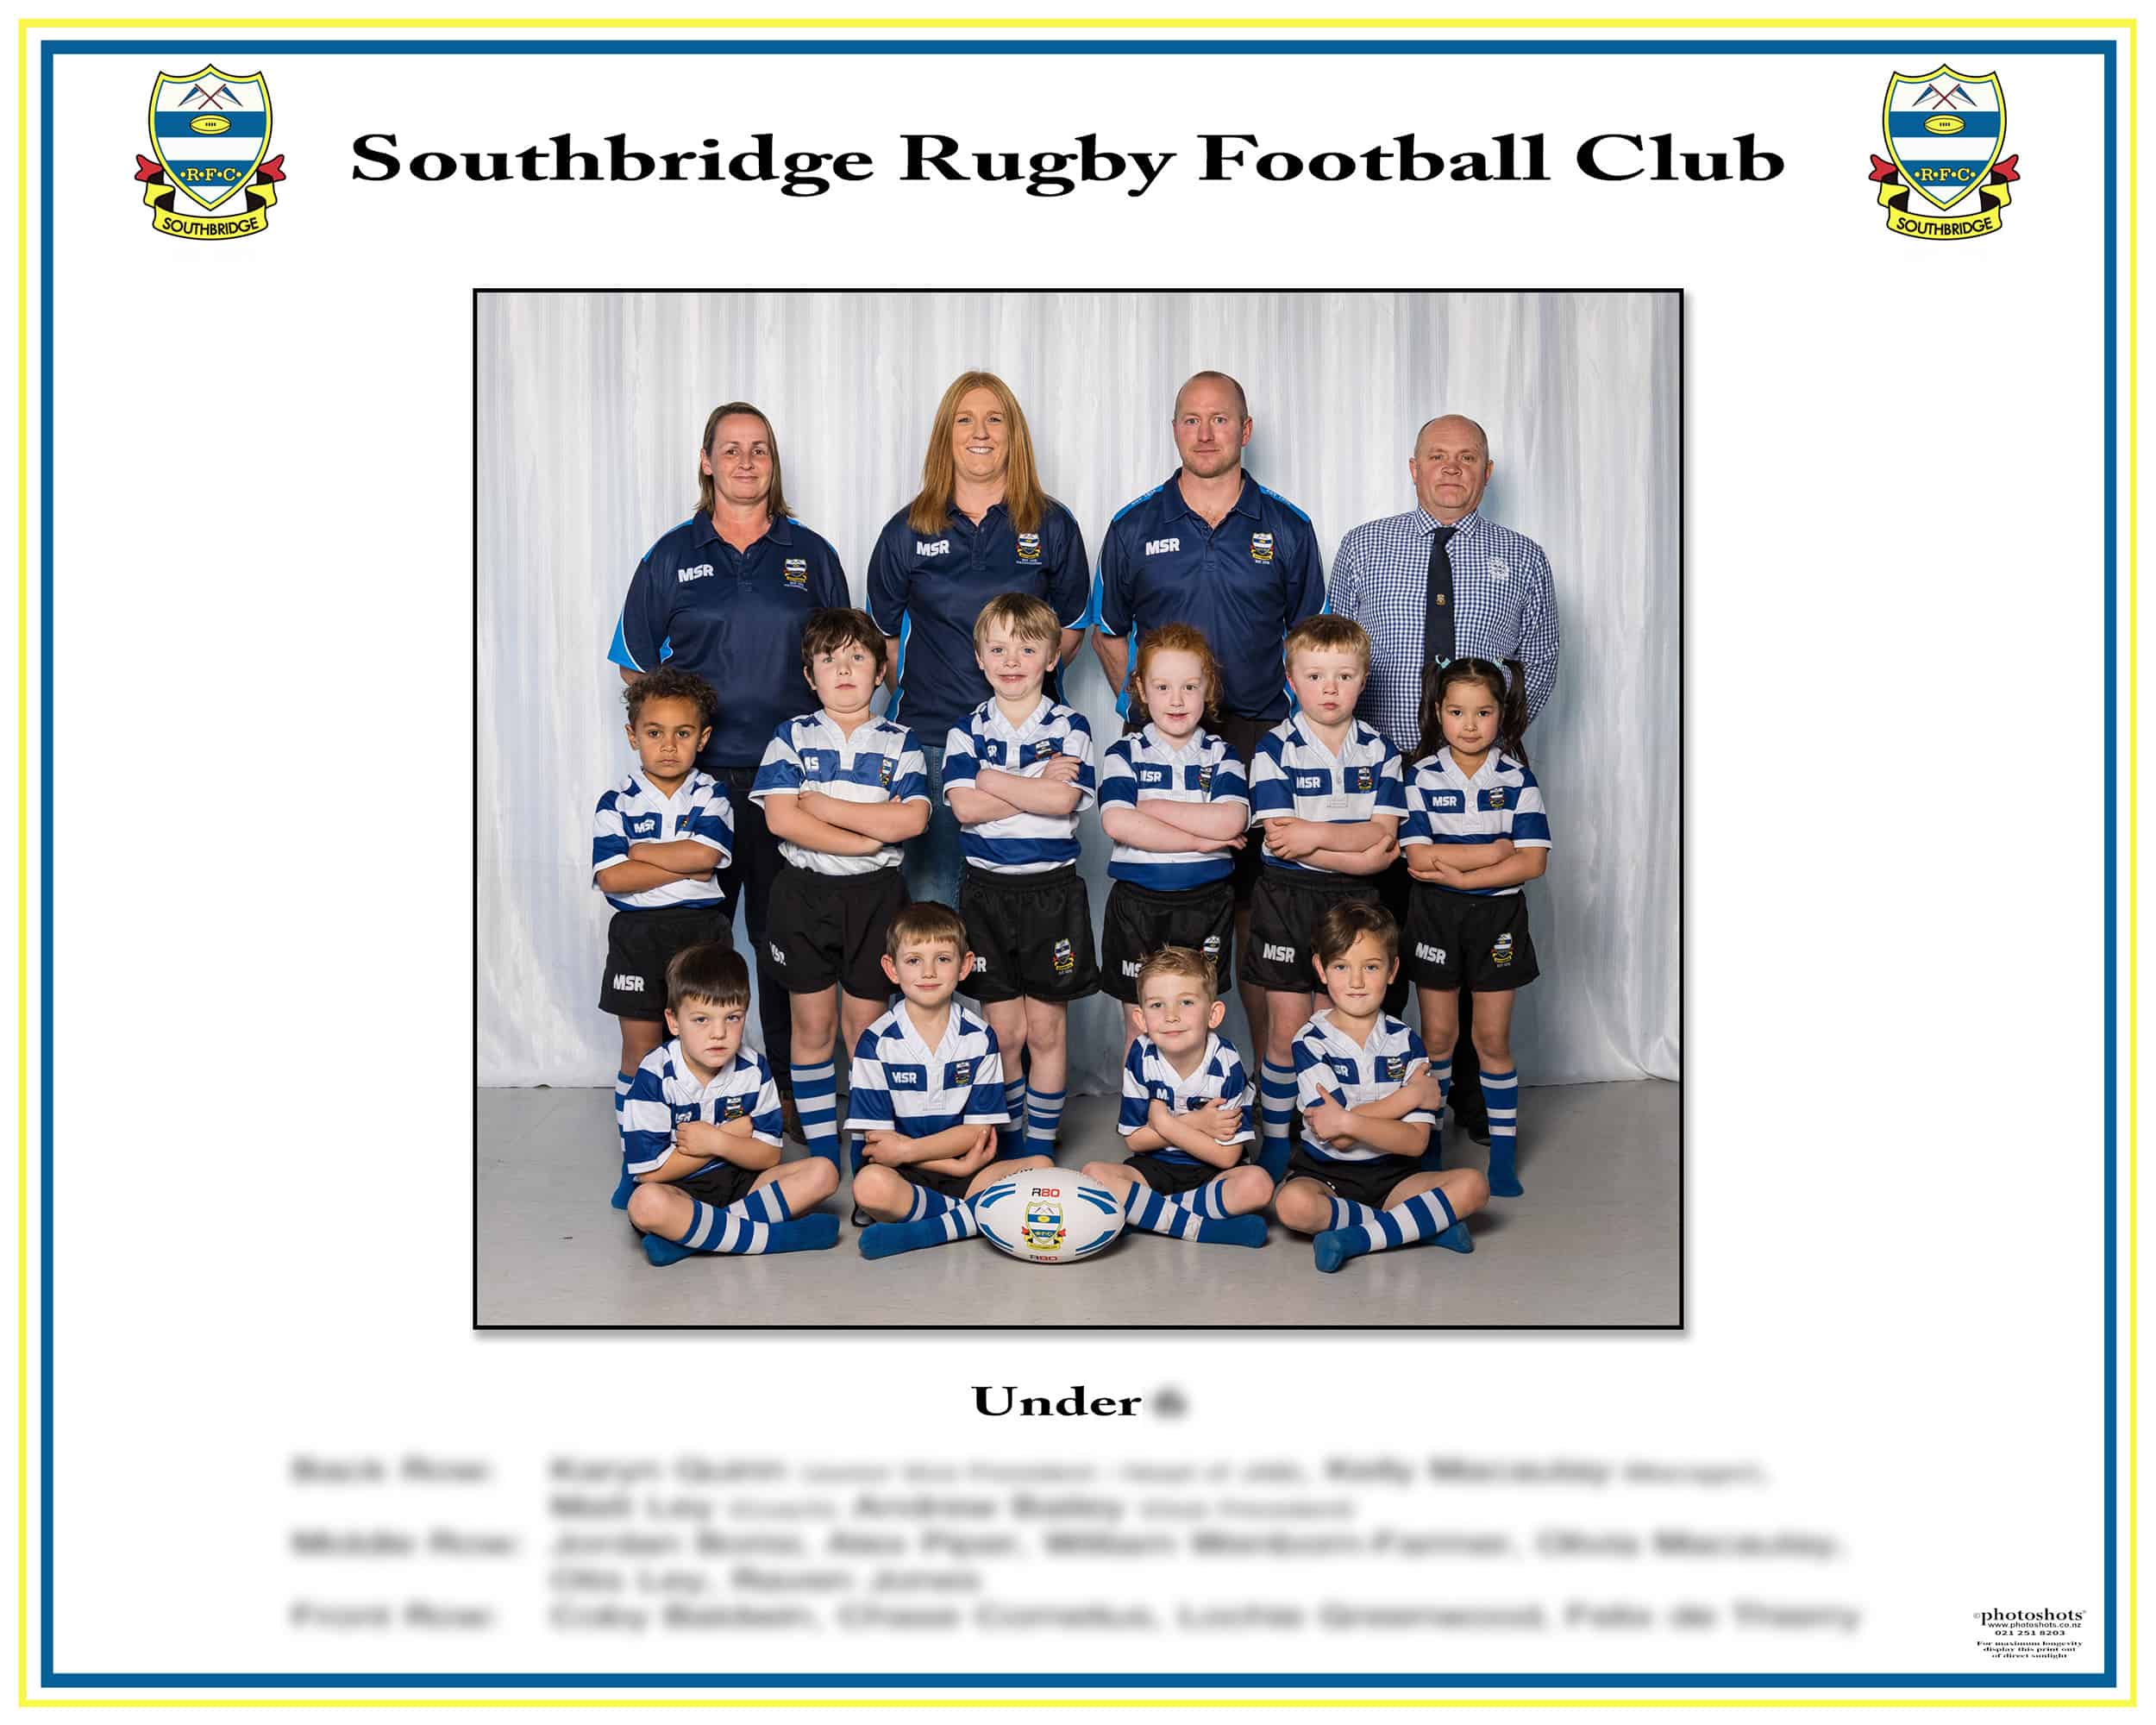 Southbridge junior rugby team photo with coaches and managers.